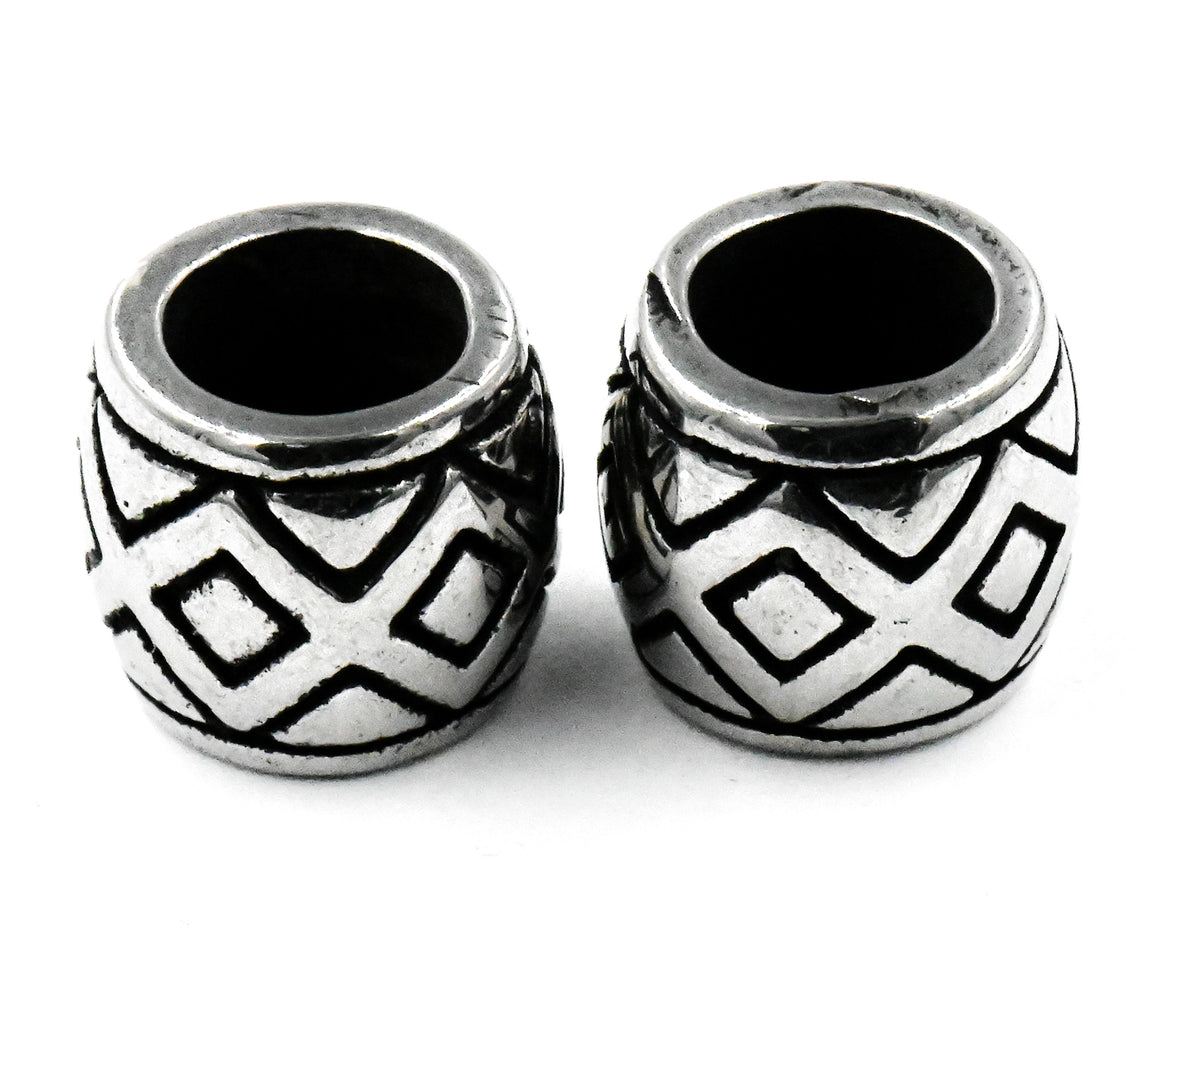 Stainless Steel Beads, 1pc, Rhombus Pattern Large Hole Beads, 11.5x10mm Antique Silver